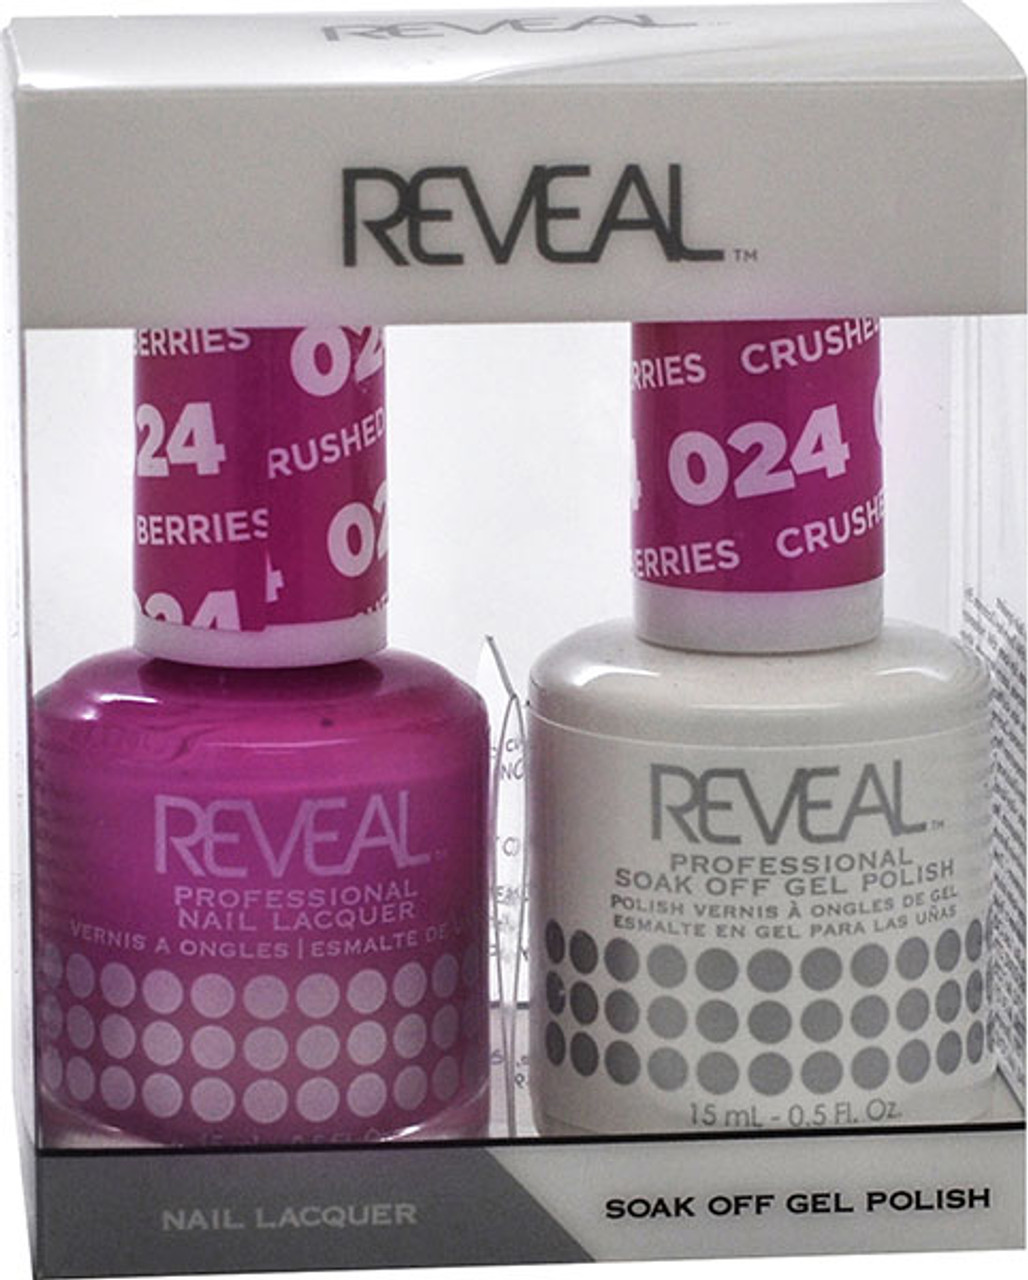 Reveal Gel Polish & Nail Lacquer Matching Duo - CRUSHED BERRIES - .5 oz